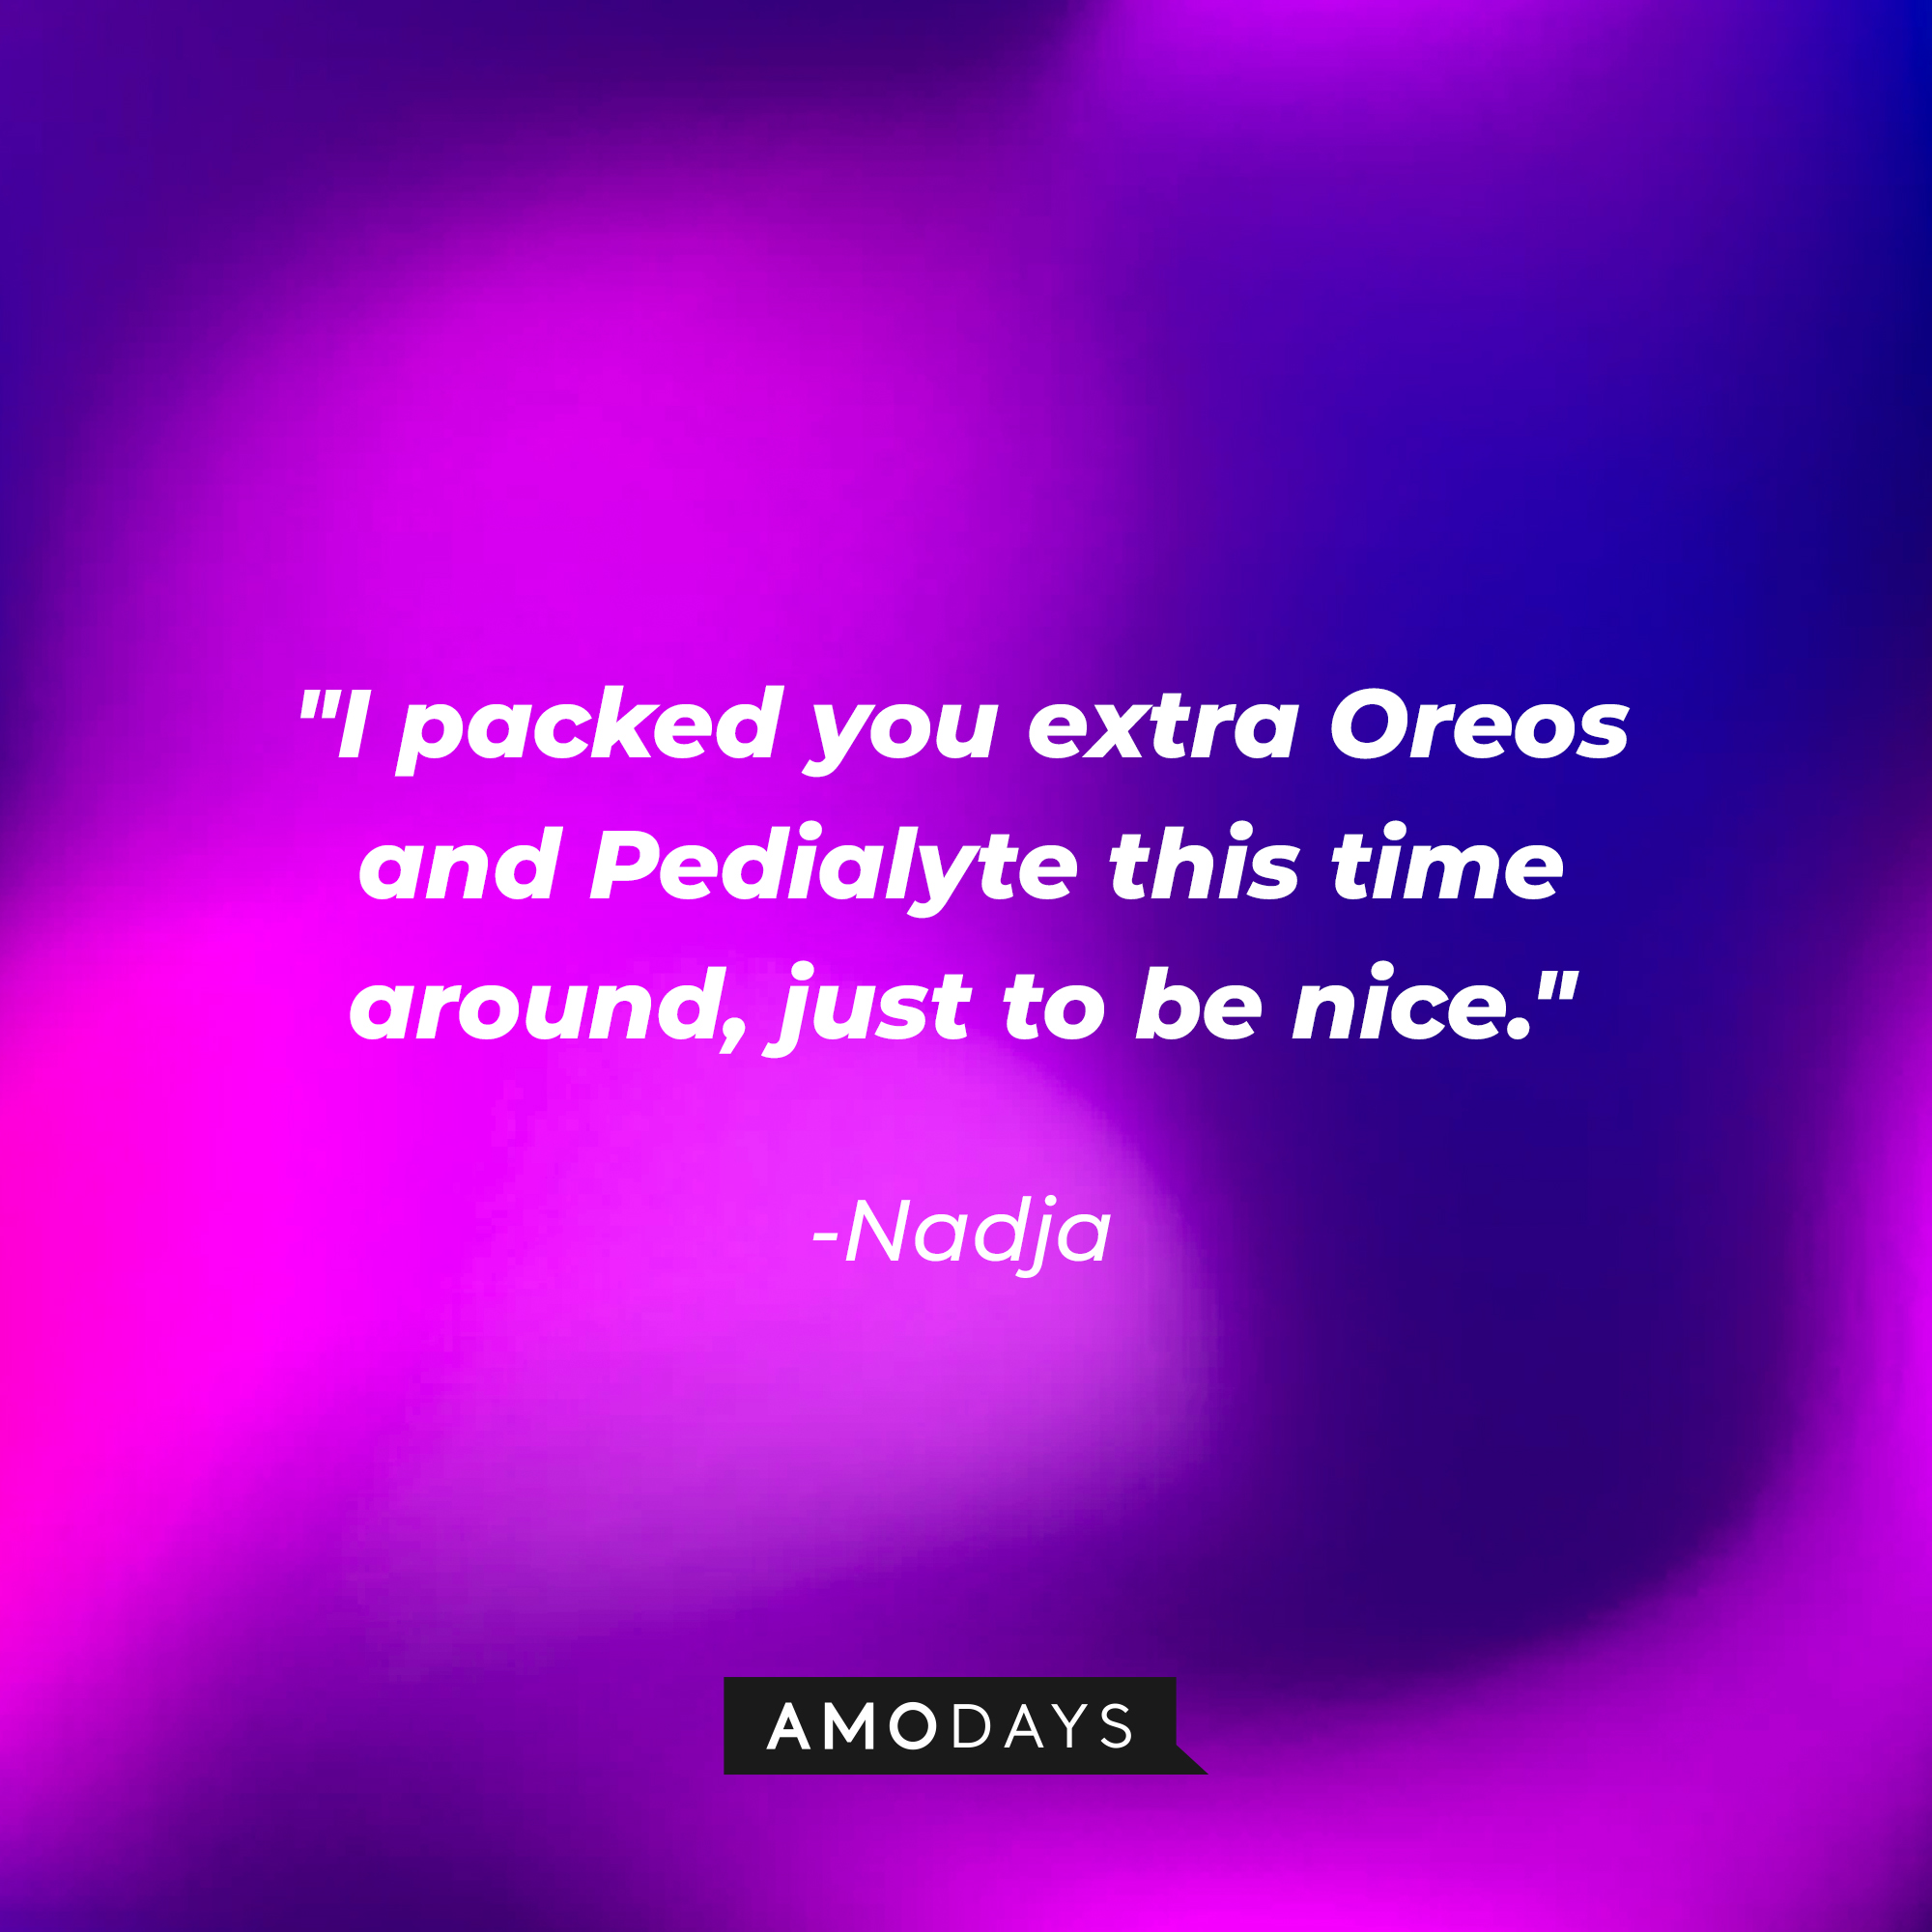 Nadja’s quote: "I packed you extra Oreos and Pedialyte this time around, just to be nice." | Source: Amodays